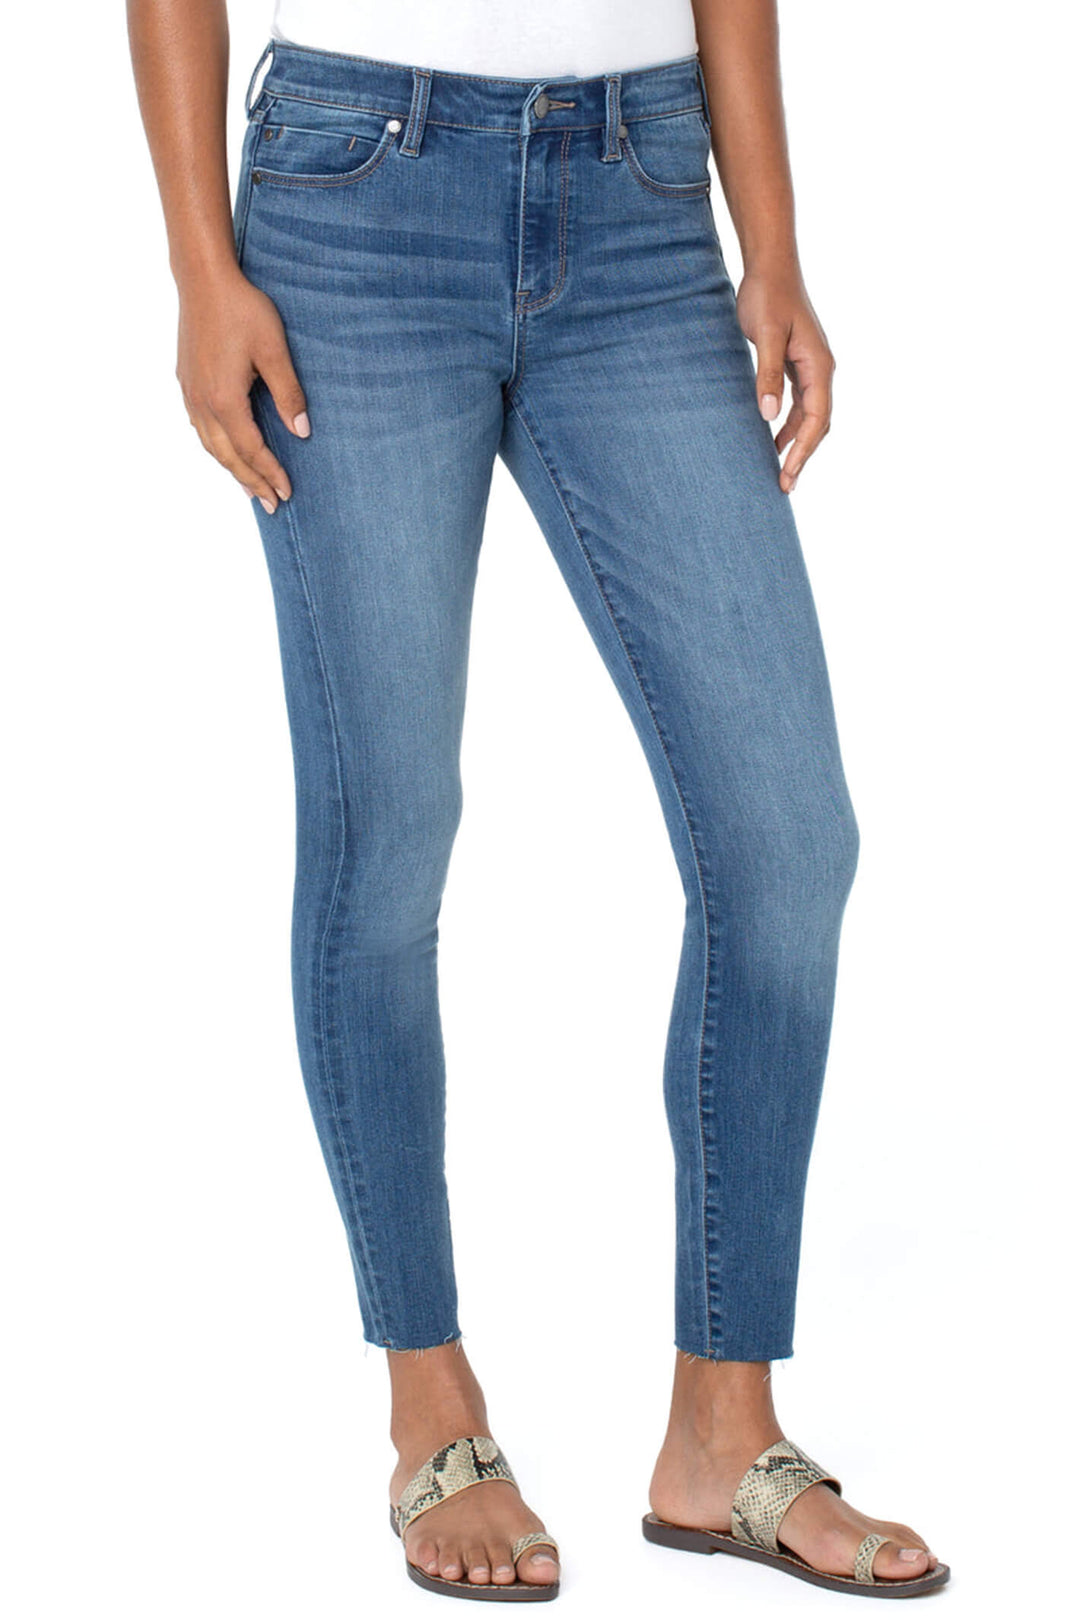 Liverpool Jeans LM2404EP-6637 Abby Ankle Skinny Anniston Blue Jeans - Olivia Grace Fashion